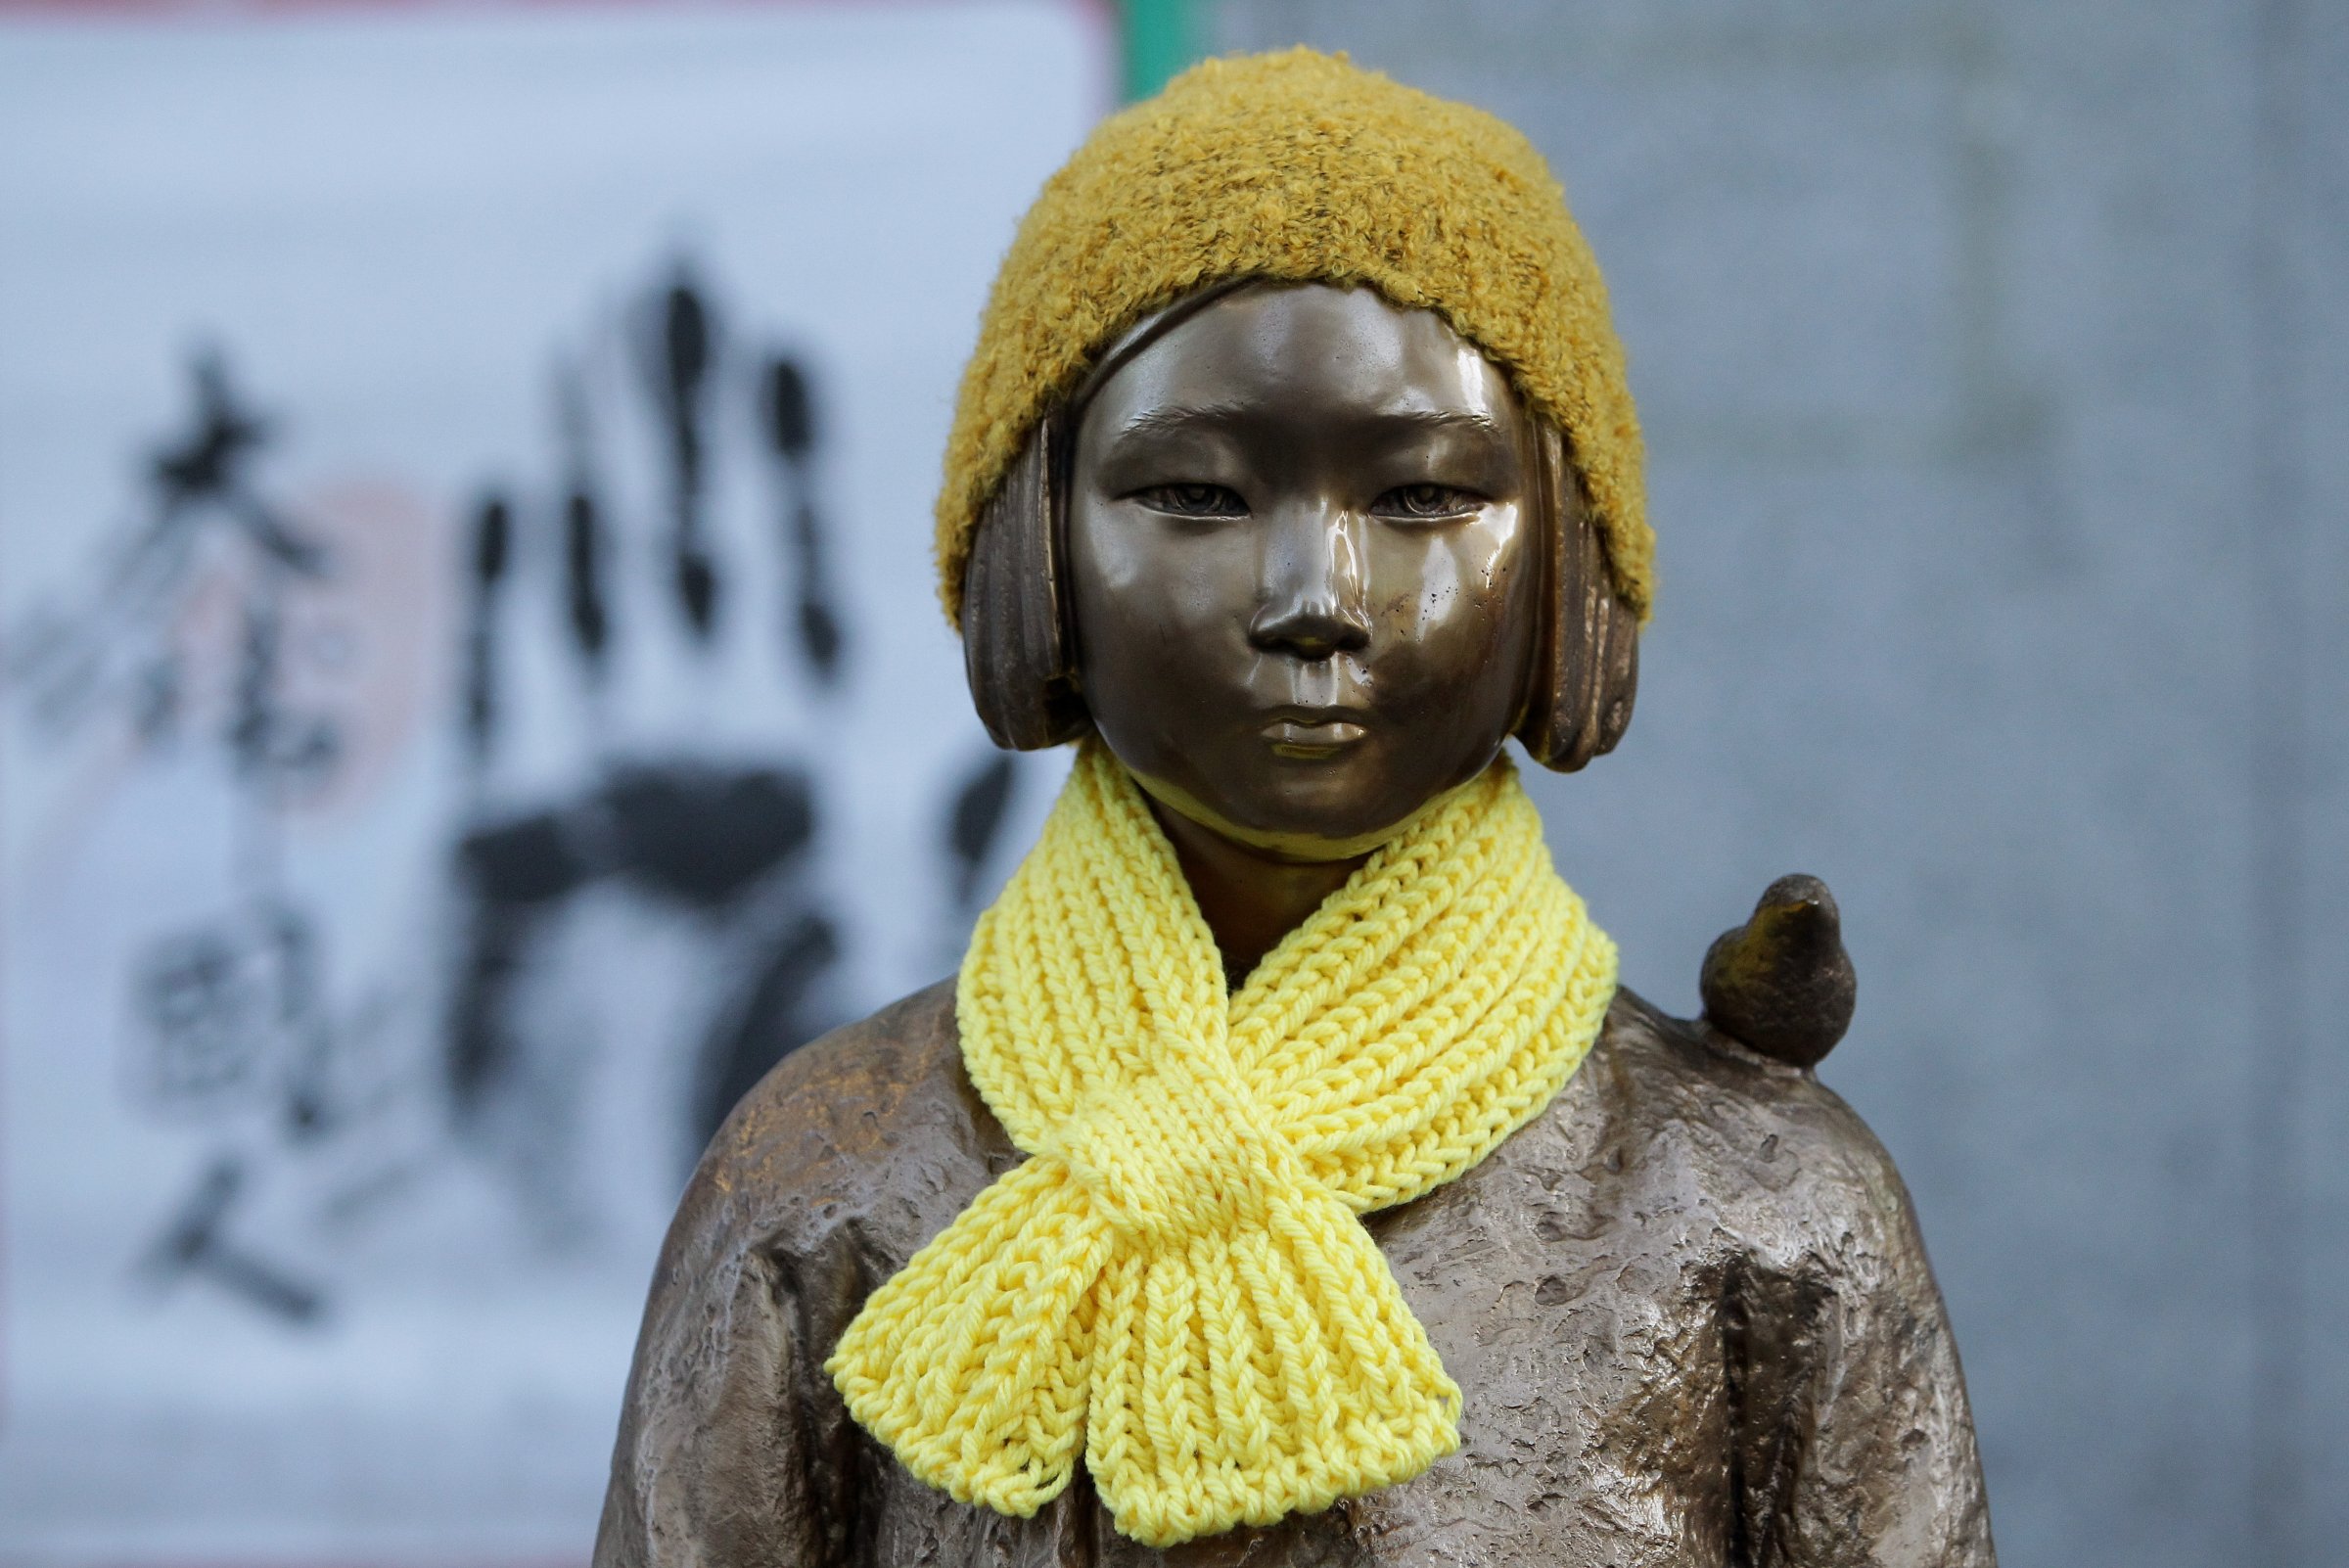 South Korea And Japan Hold Ministerial Meeting On 'Comfort Women' Issue